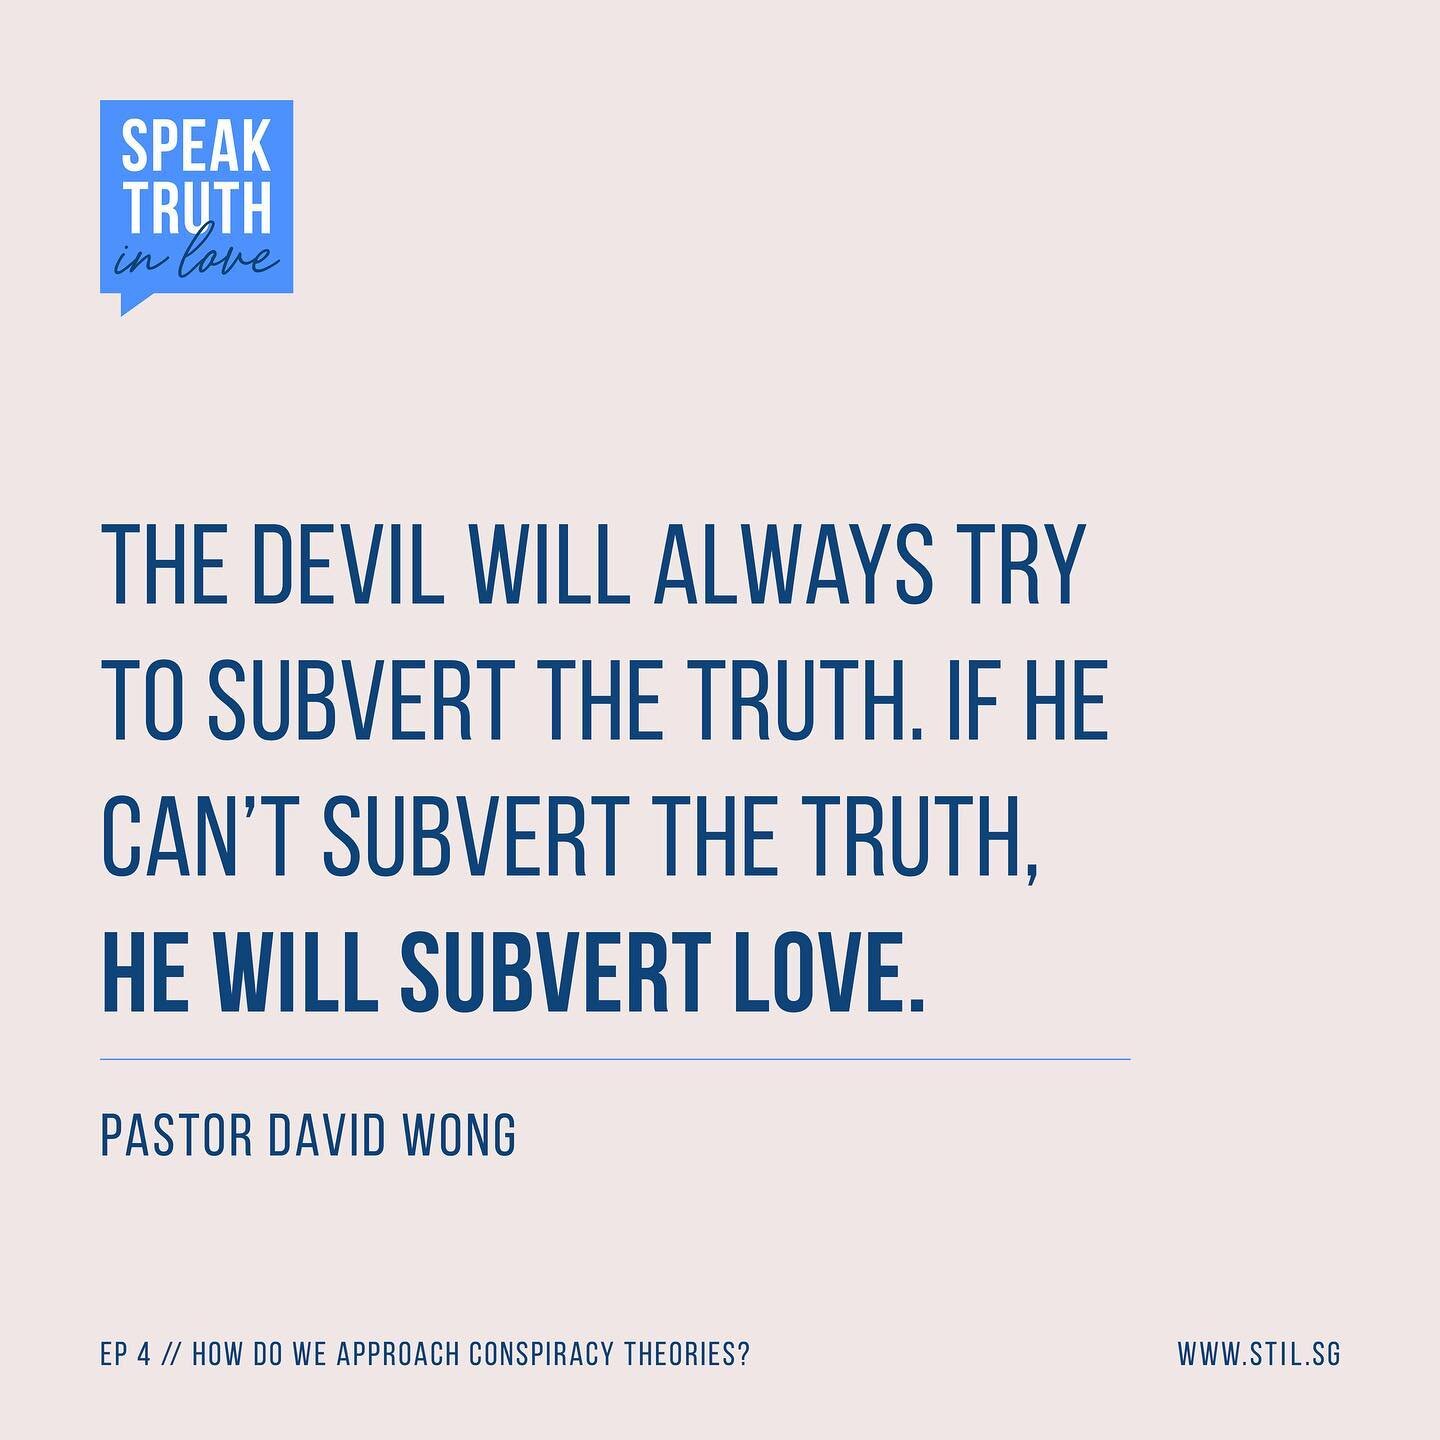 The Bible states that if we do not have love, we are only a resounding gong or a clanging cymbal. If we want to speak truth, we must first love.